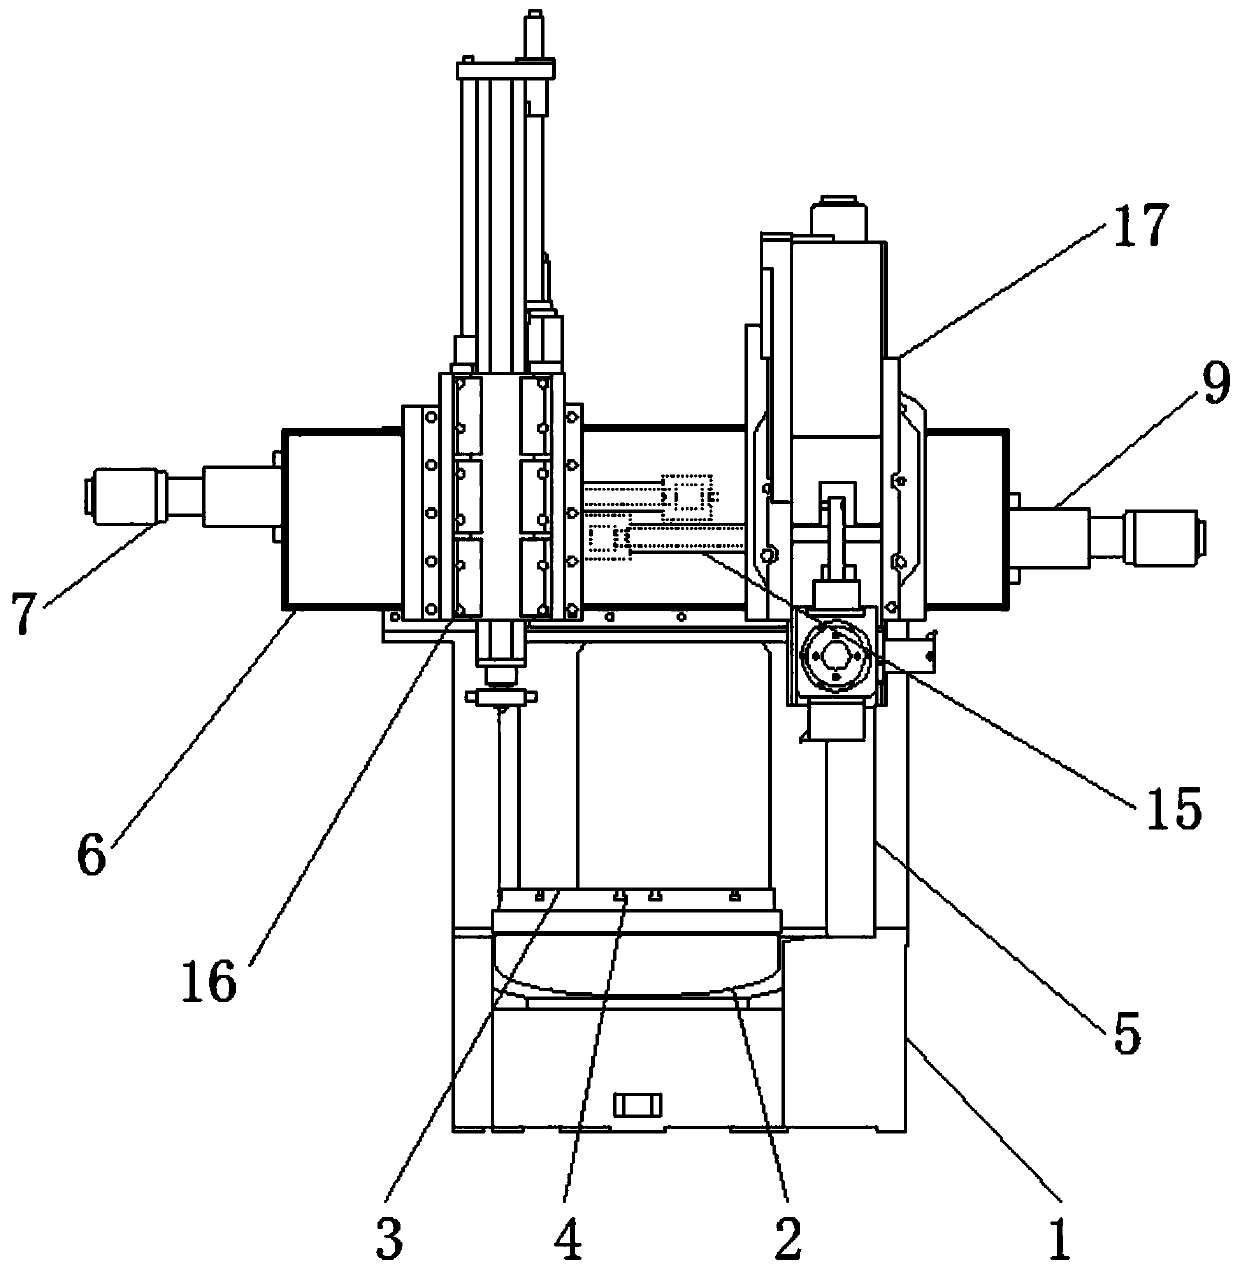 Novel vertical numerical control turning and grinding composite machine tool